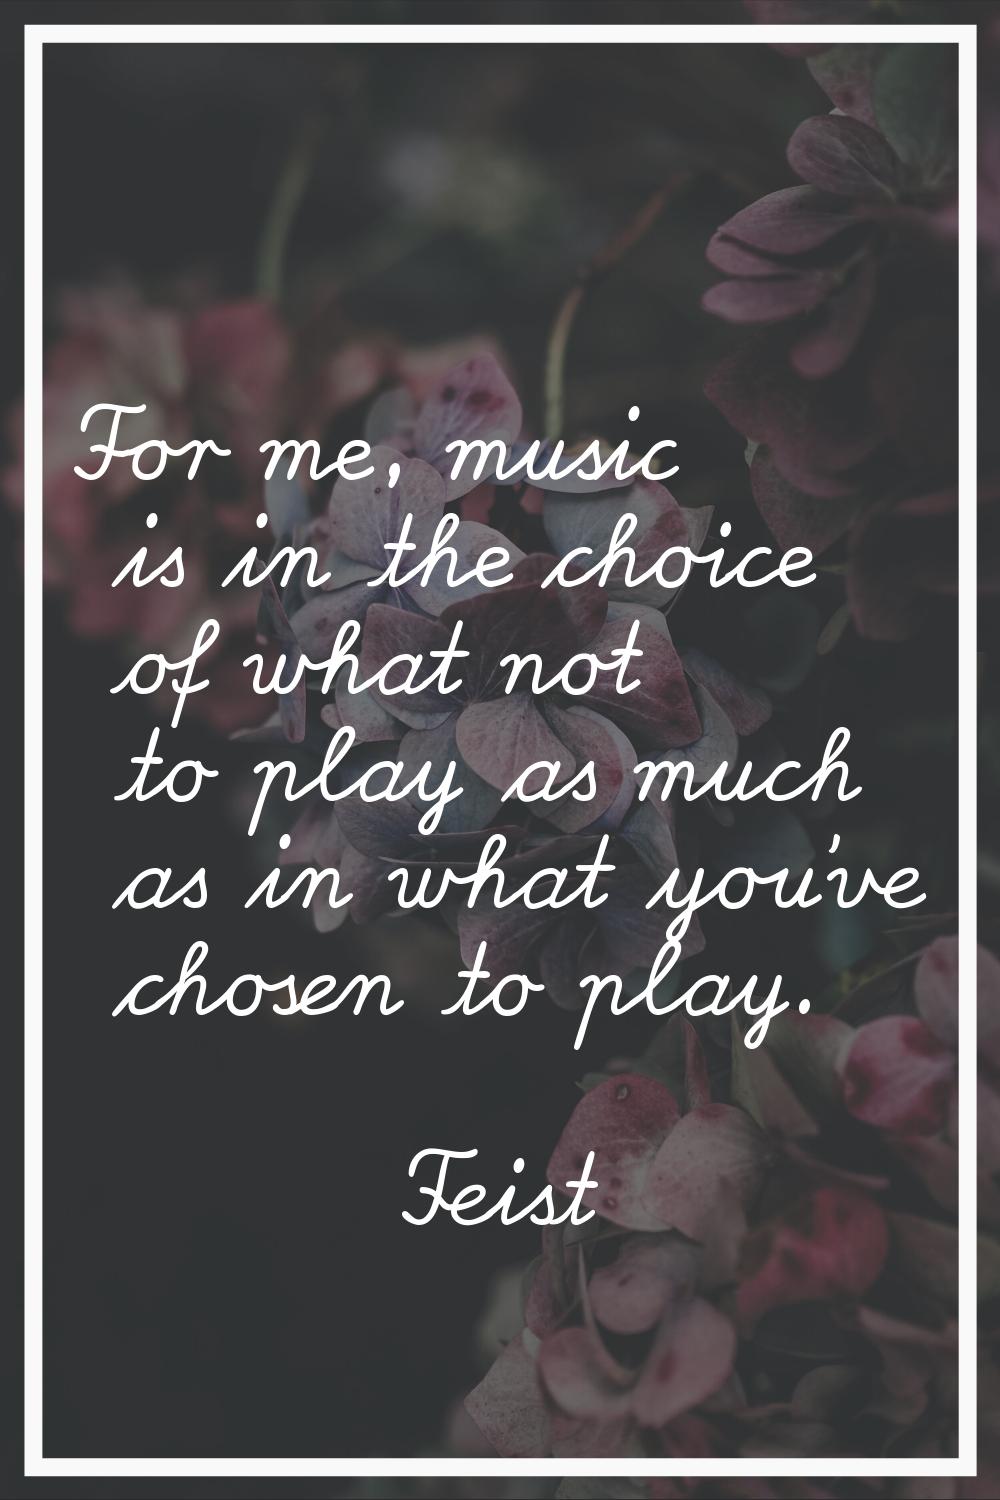 For me, music is in the choice of what not to play as much as in what you've chosen to play.